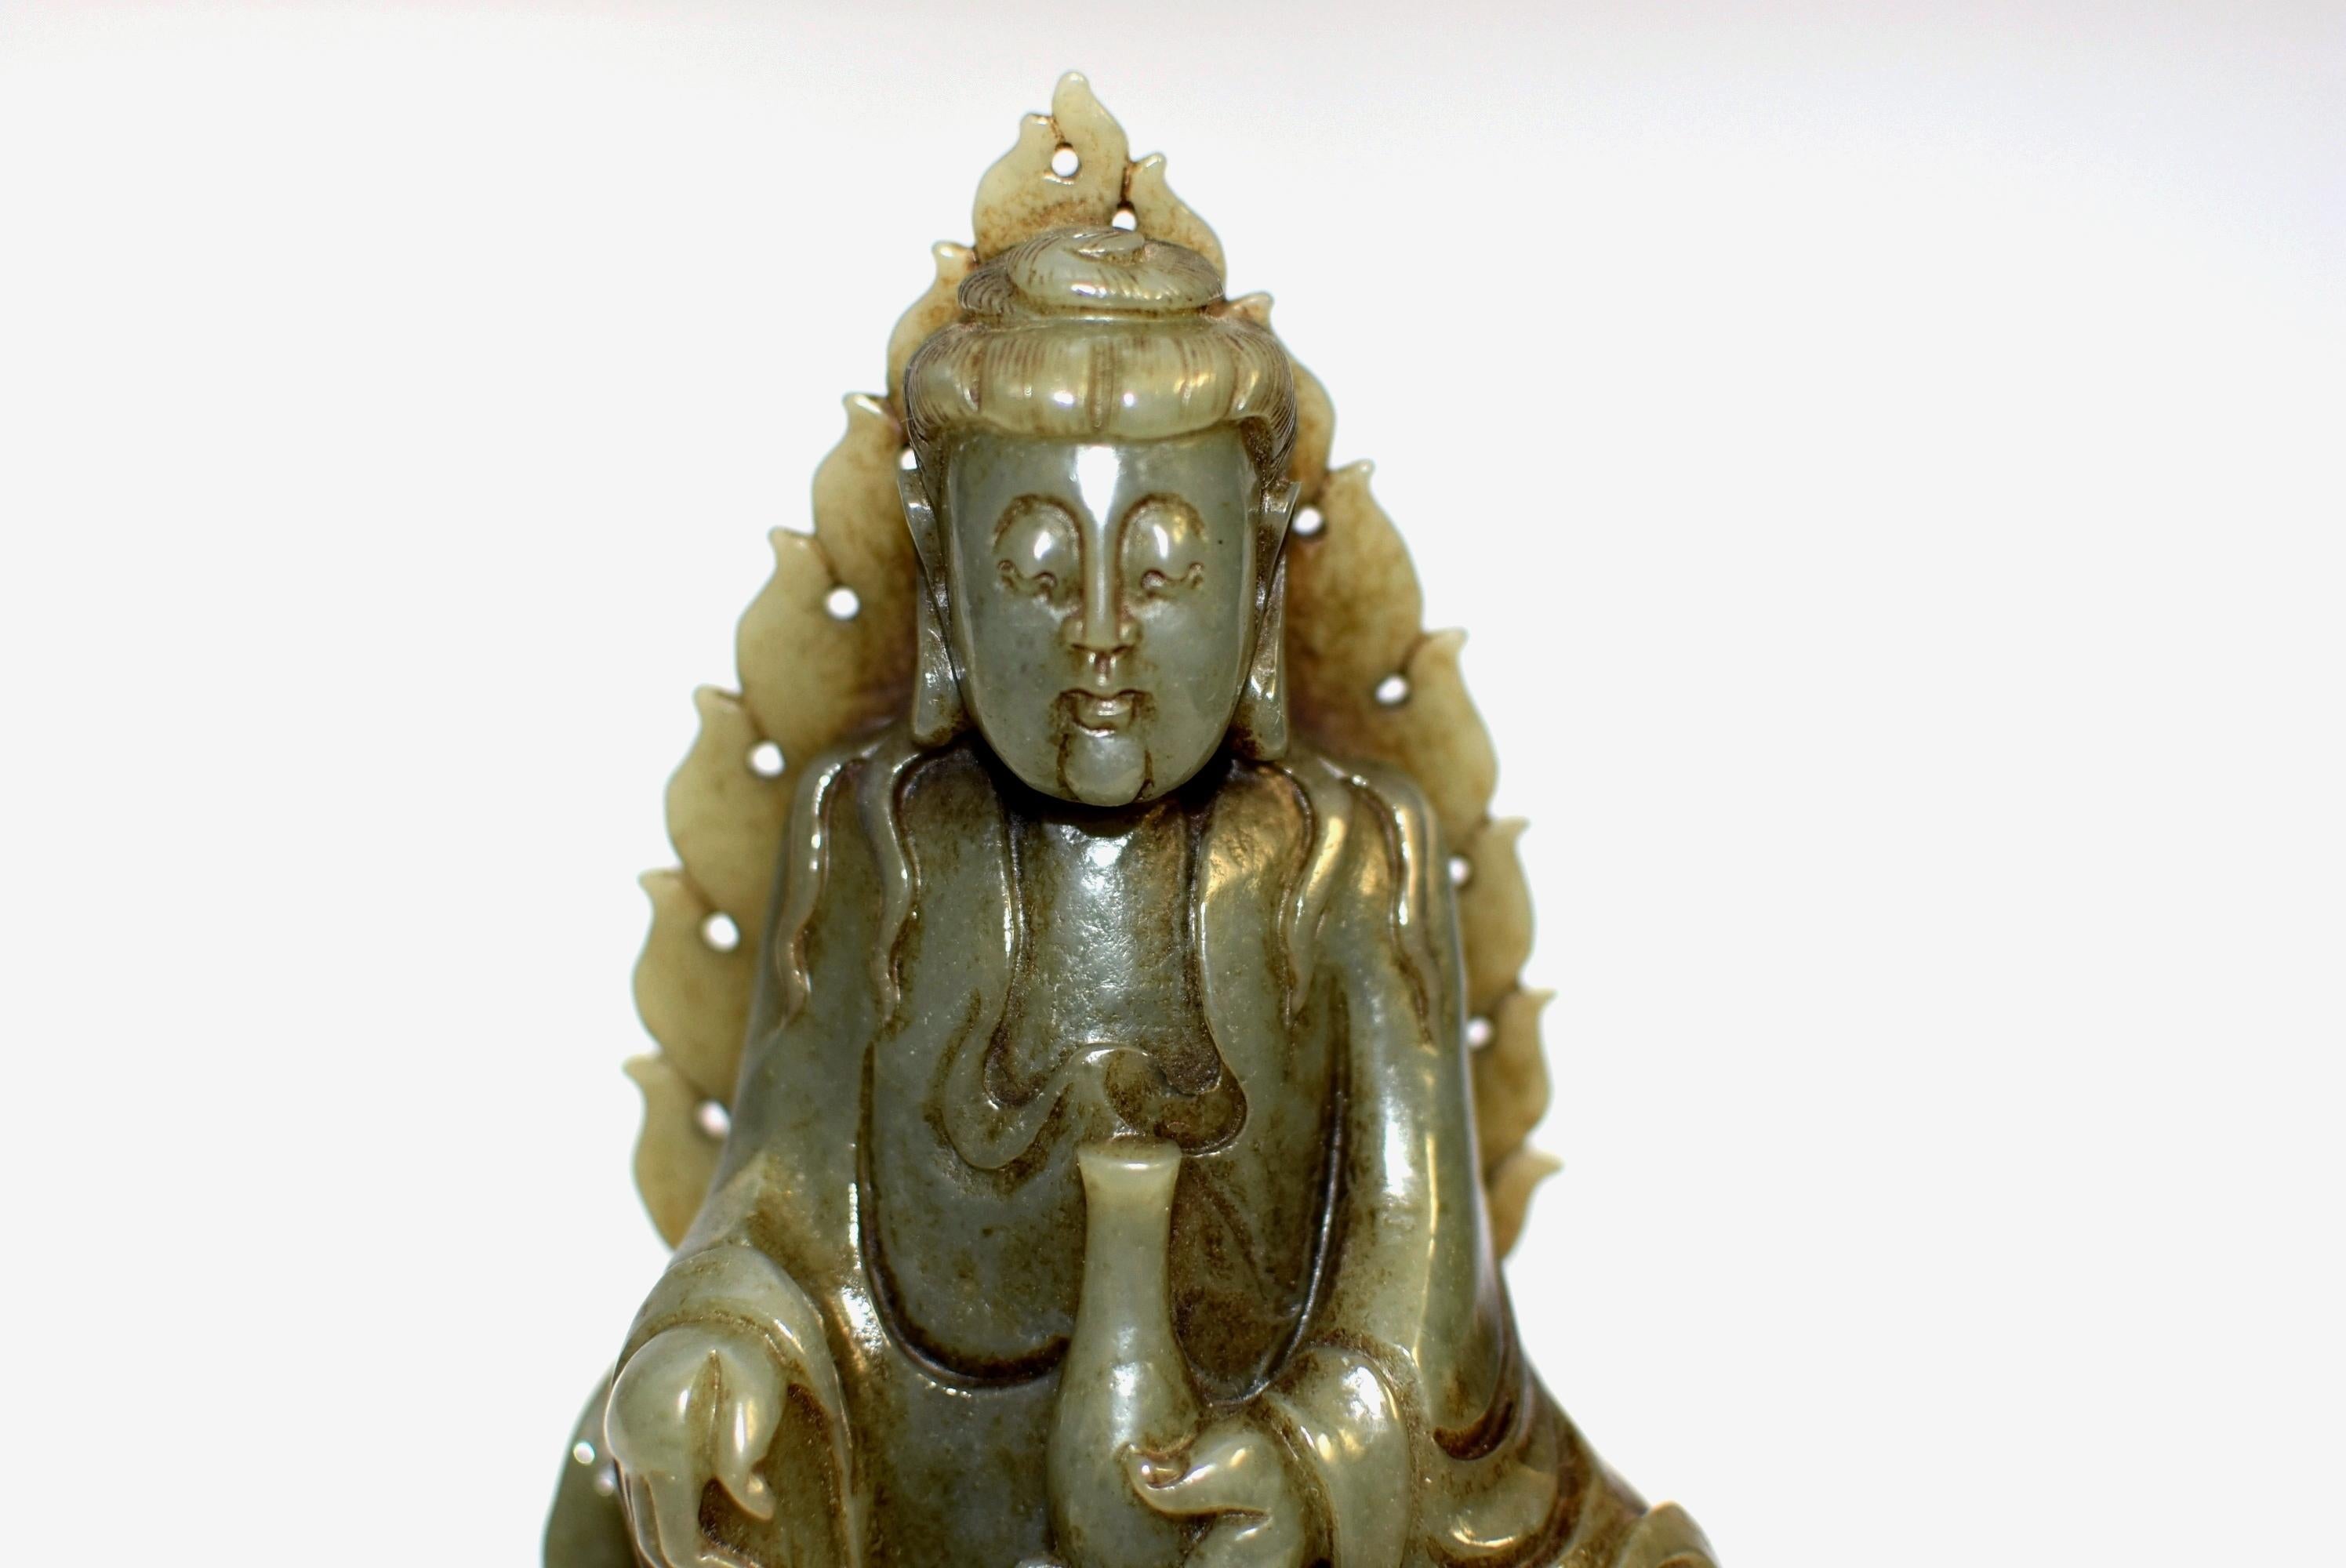 A Qing dynasty, hand carved, lustrous, solid natural nephrite green jade Buddha. Carved seated on a rock against flame-shaped mandorla, the broad-faced figure rendered with a serene expression by downcast eyes beneath high arched brows above pursed